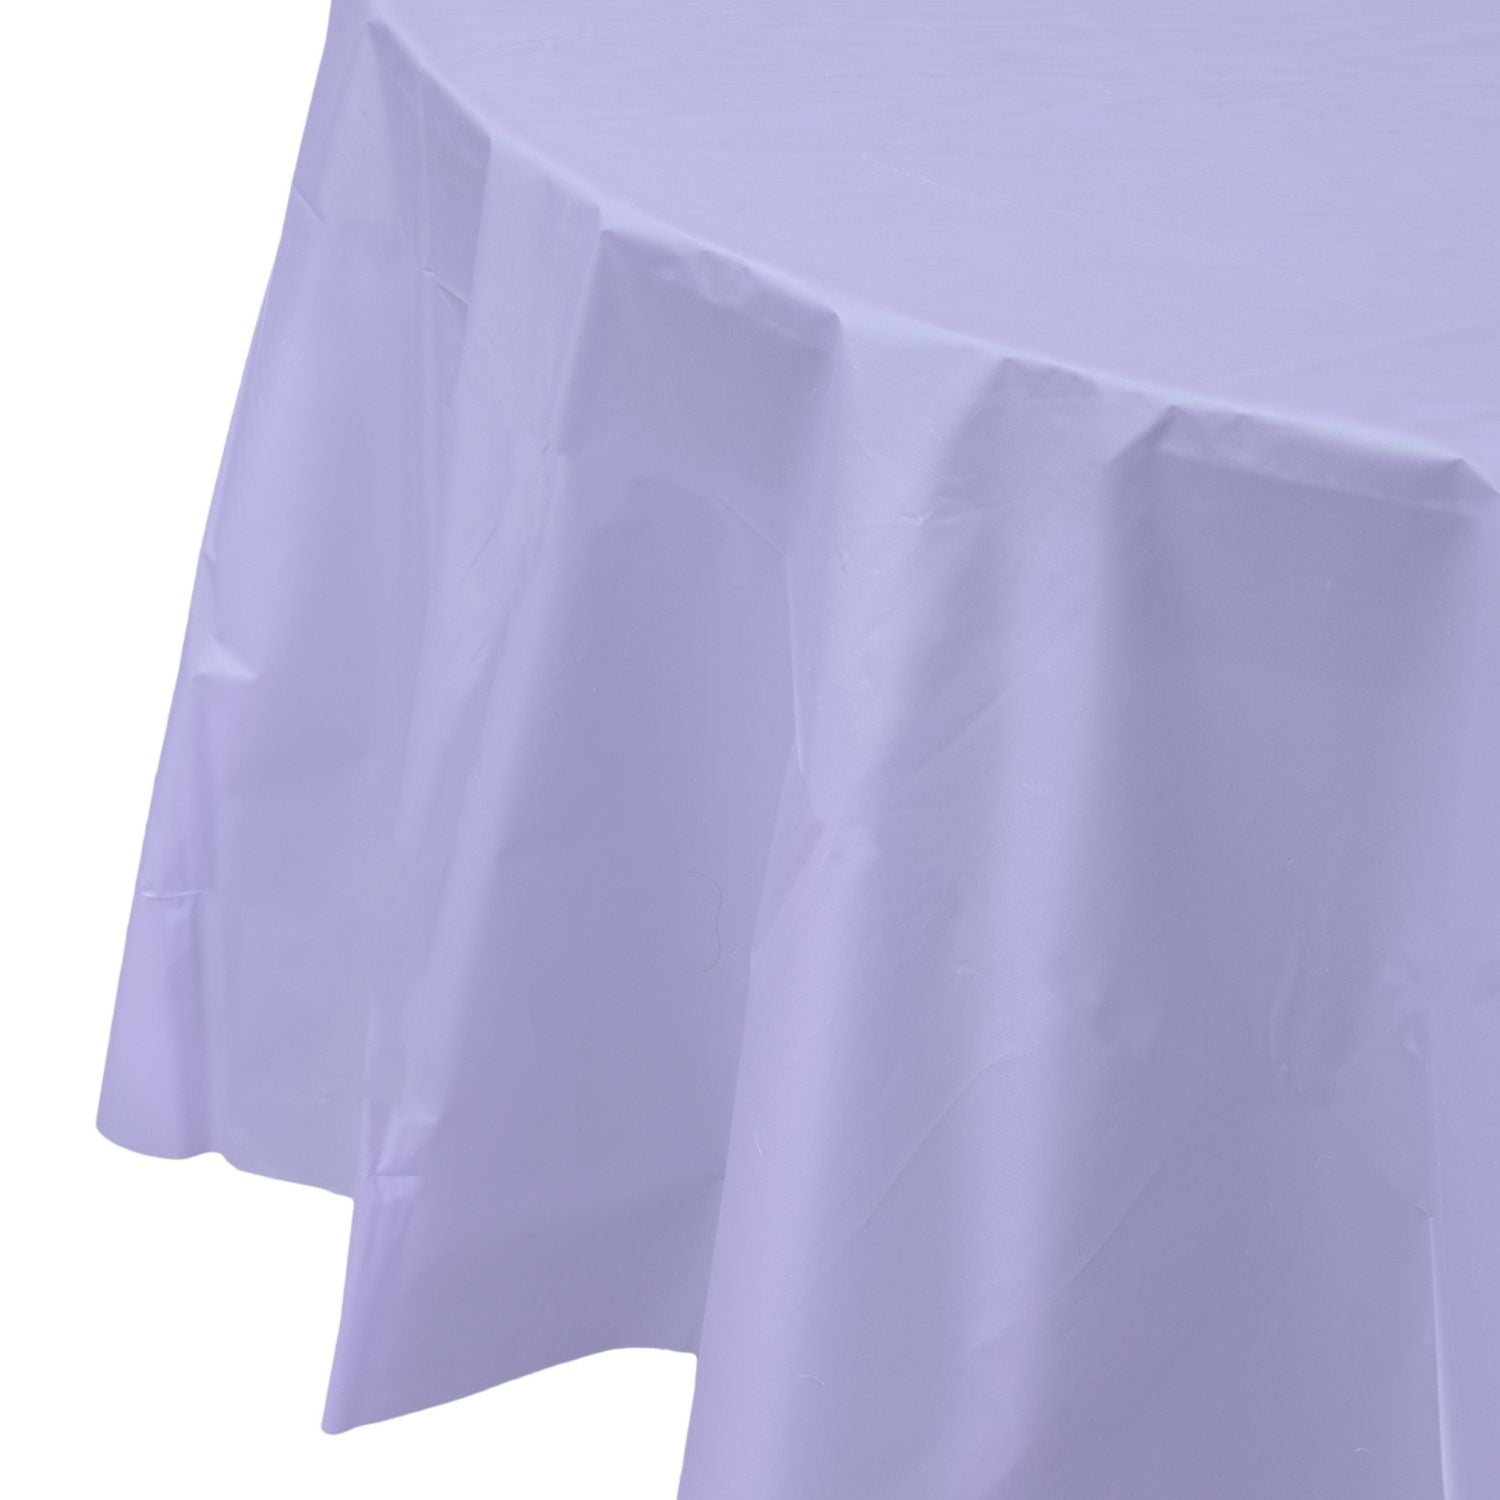 Lavender Round Plastic Tablecloth | 48 Count